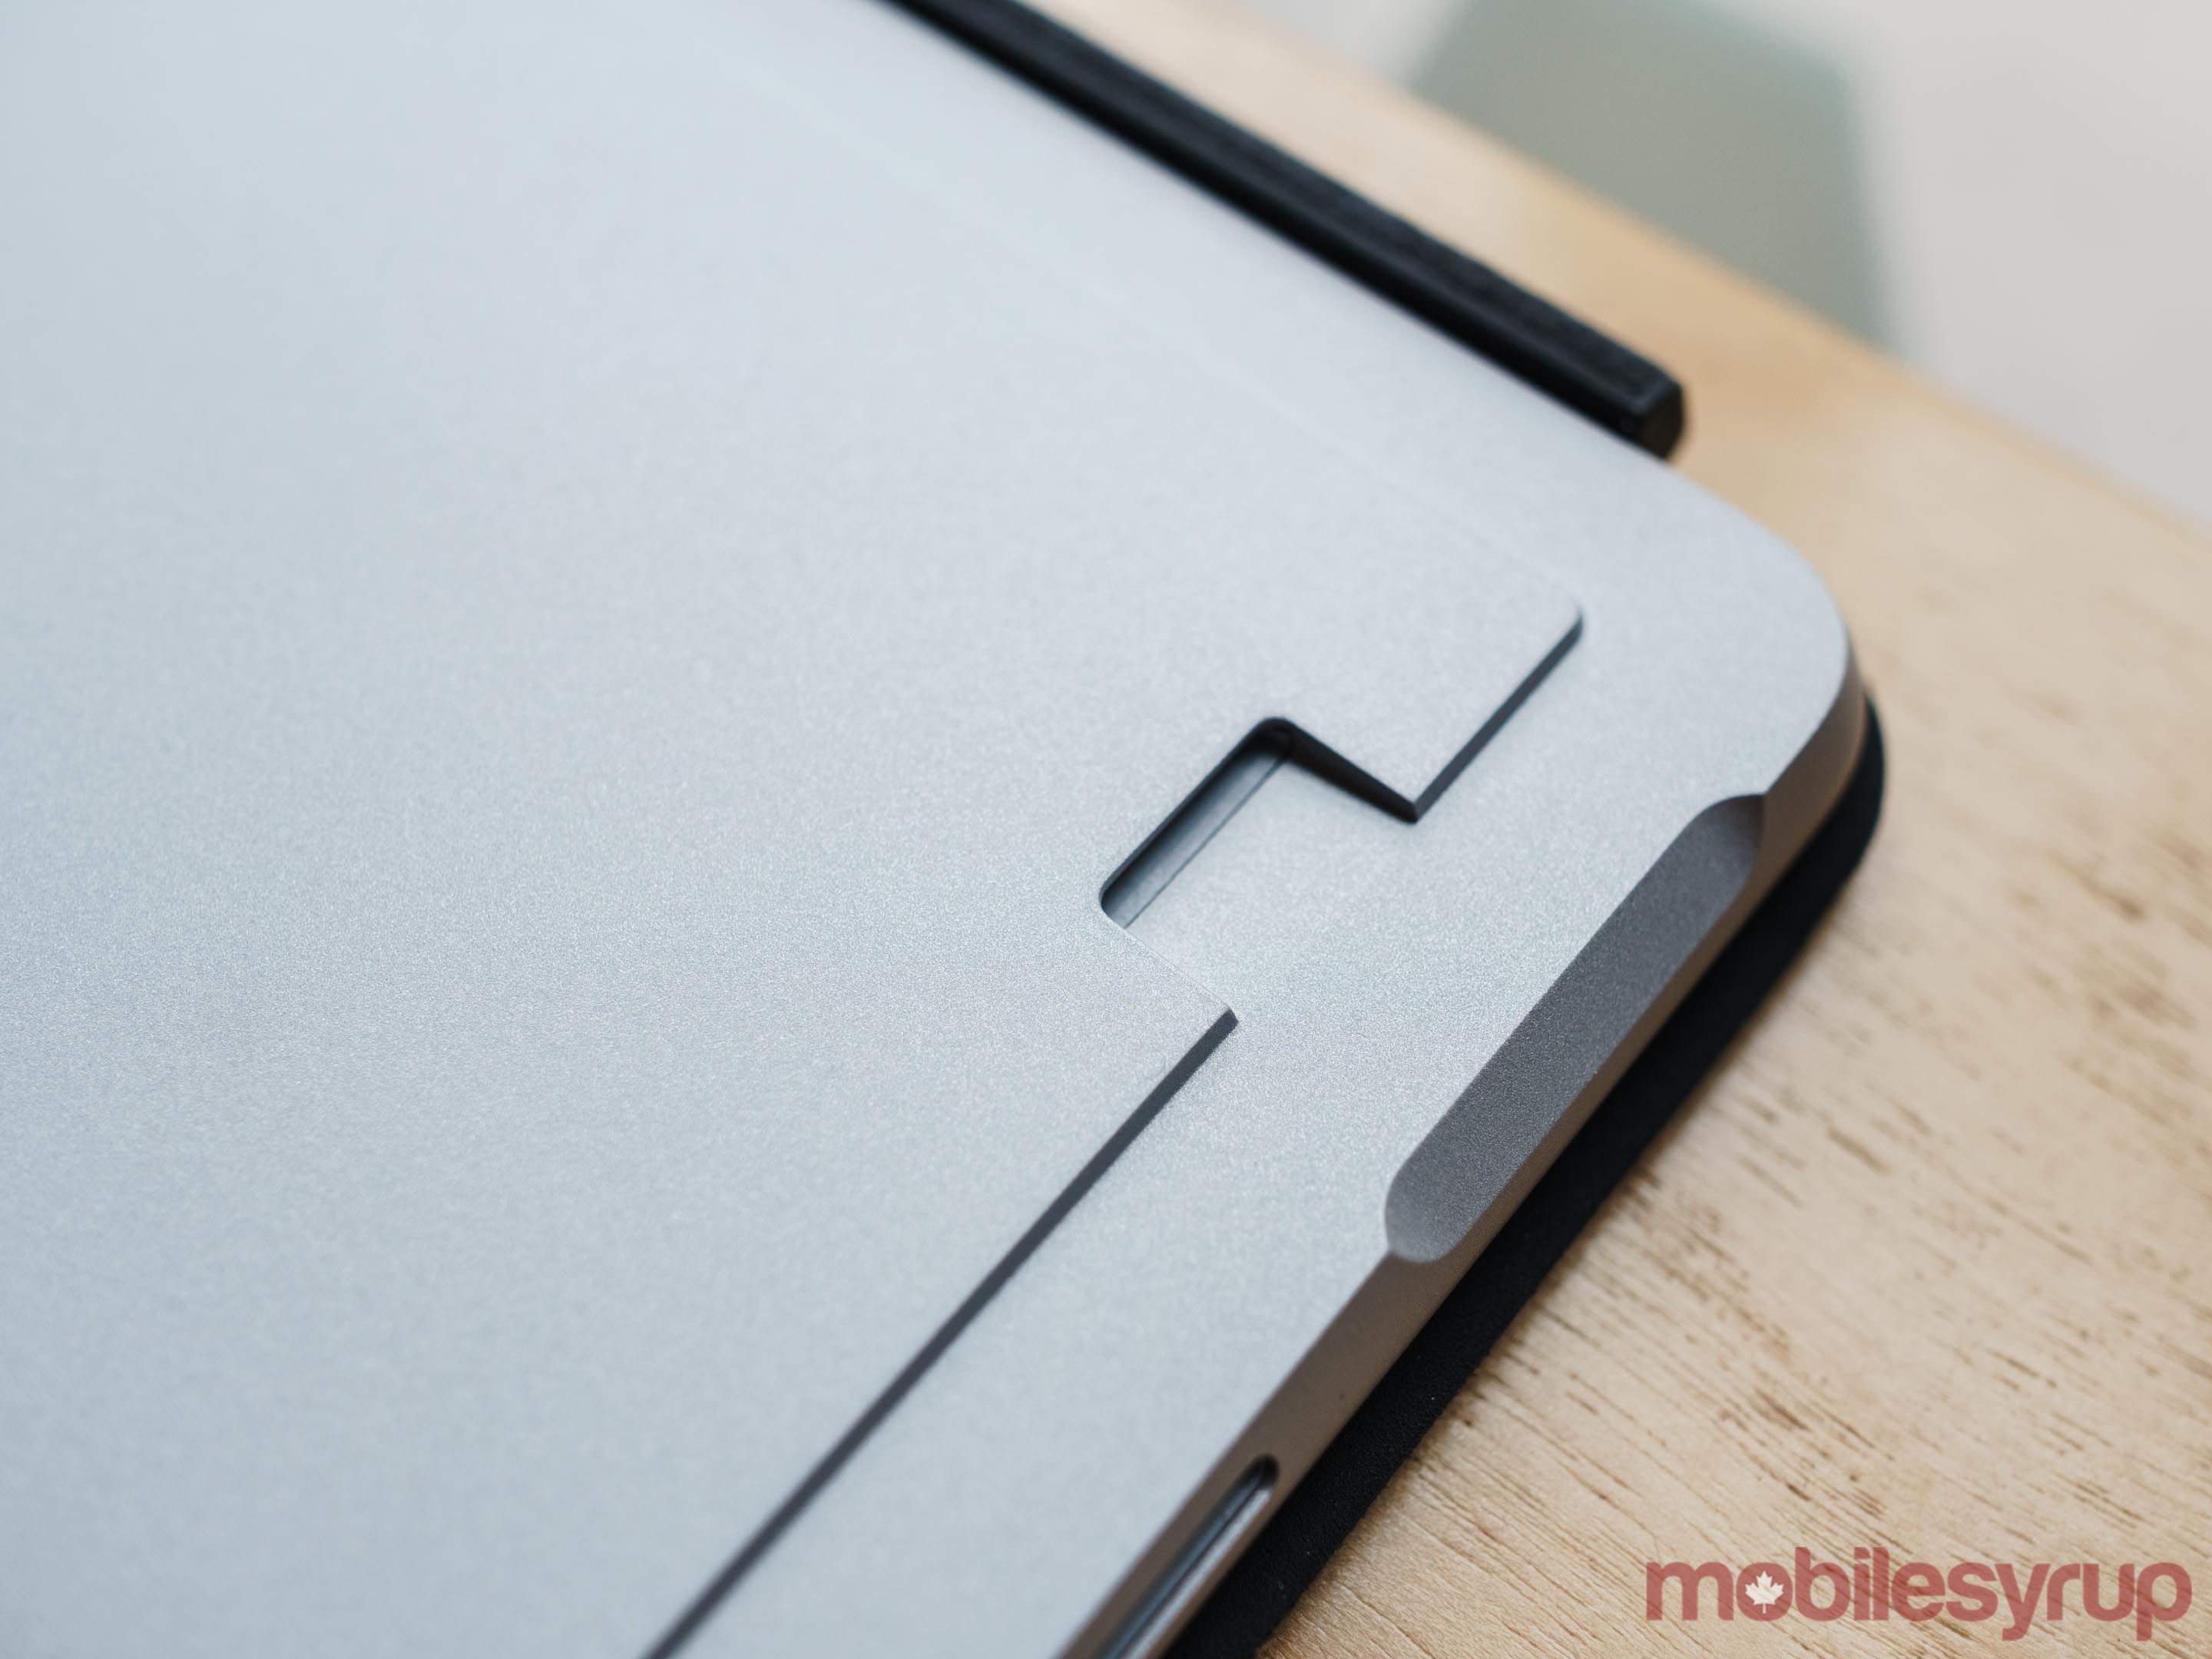 Like past Surface devices, Surface Go features a microSD card reader